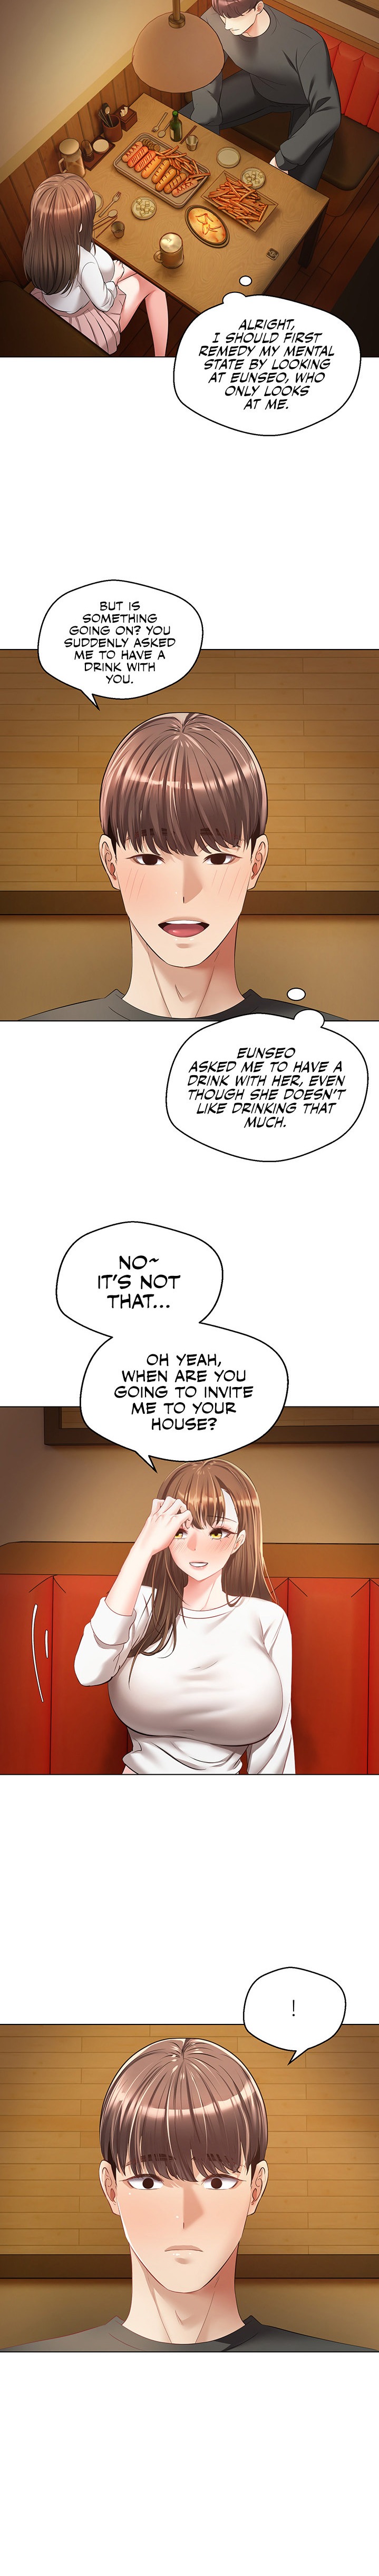 Desire Realization App - Chapter 21 Page 8